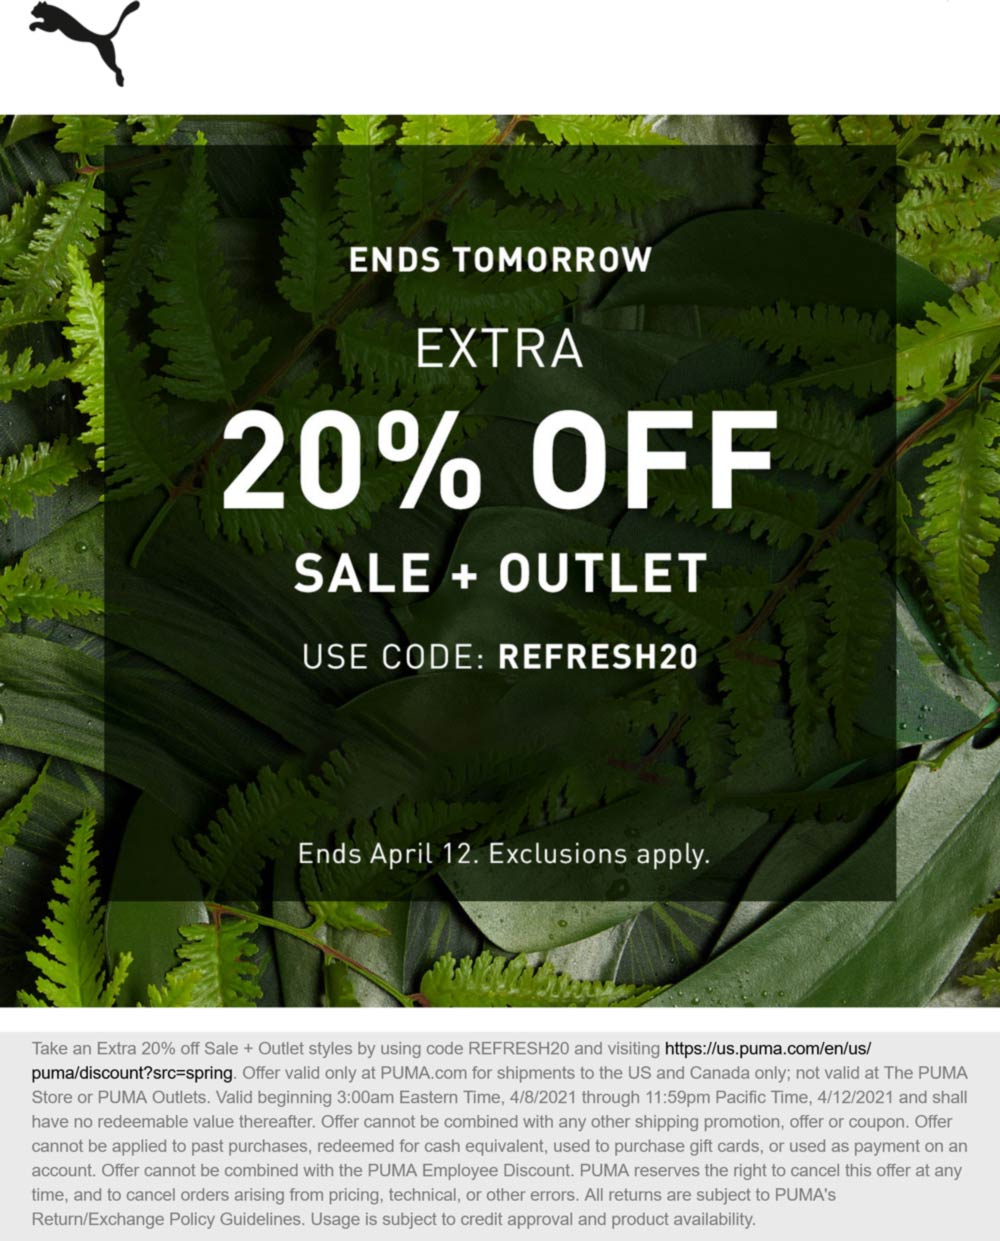 Extra 20 off sale & outlet items at PUMA via promo code REFRESH20 